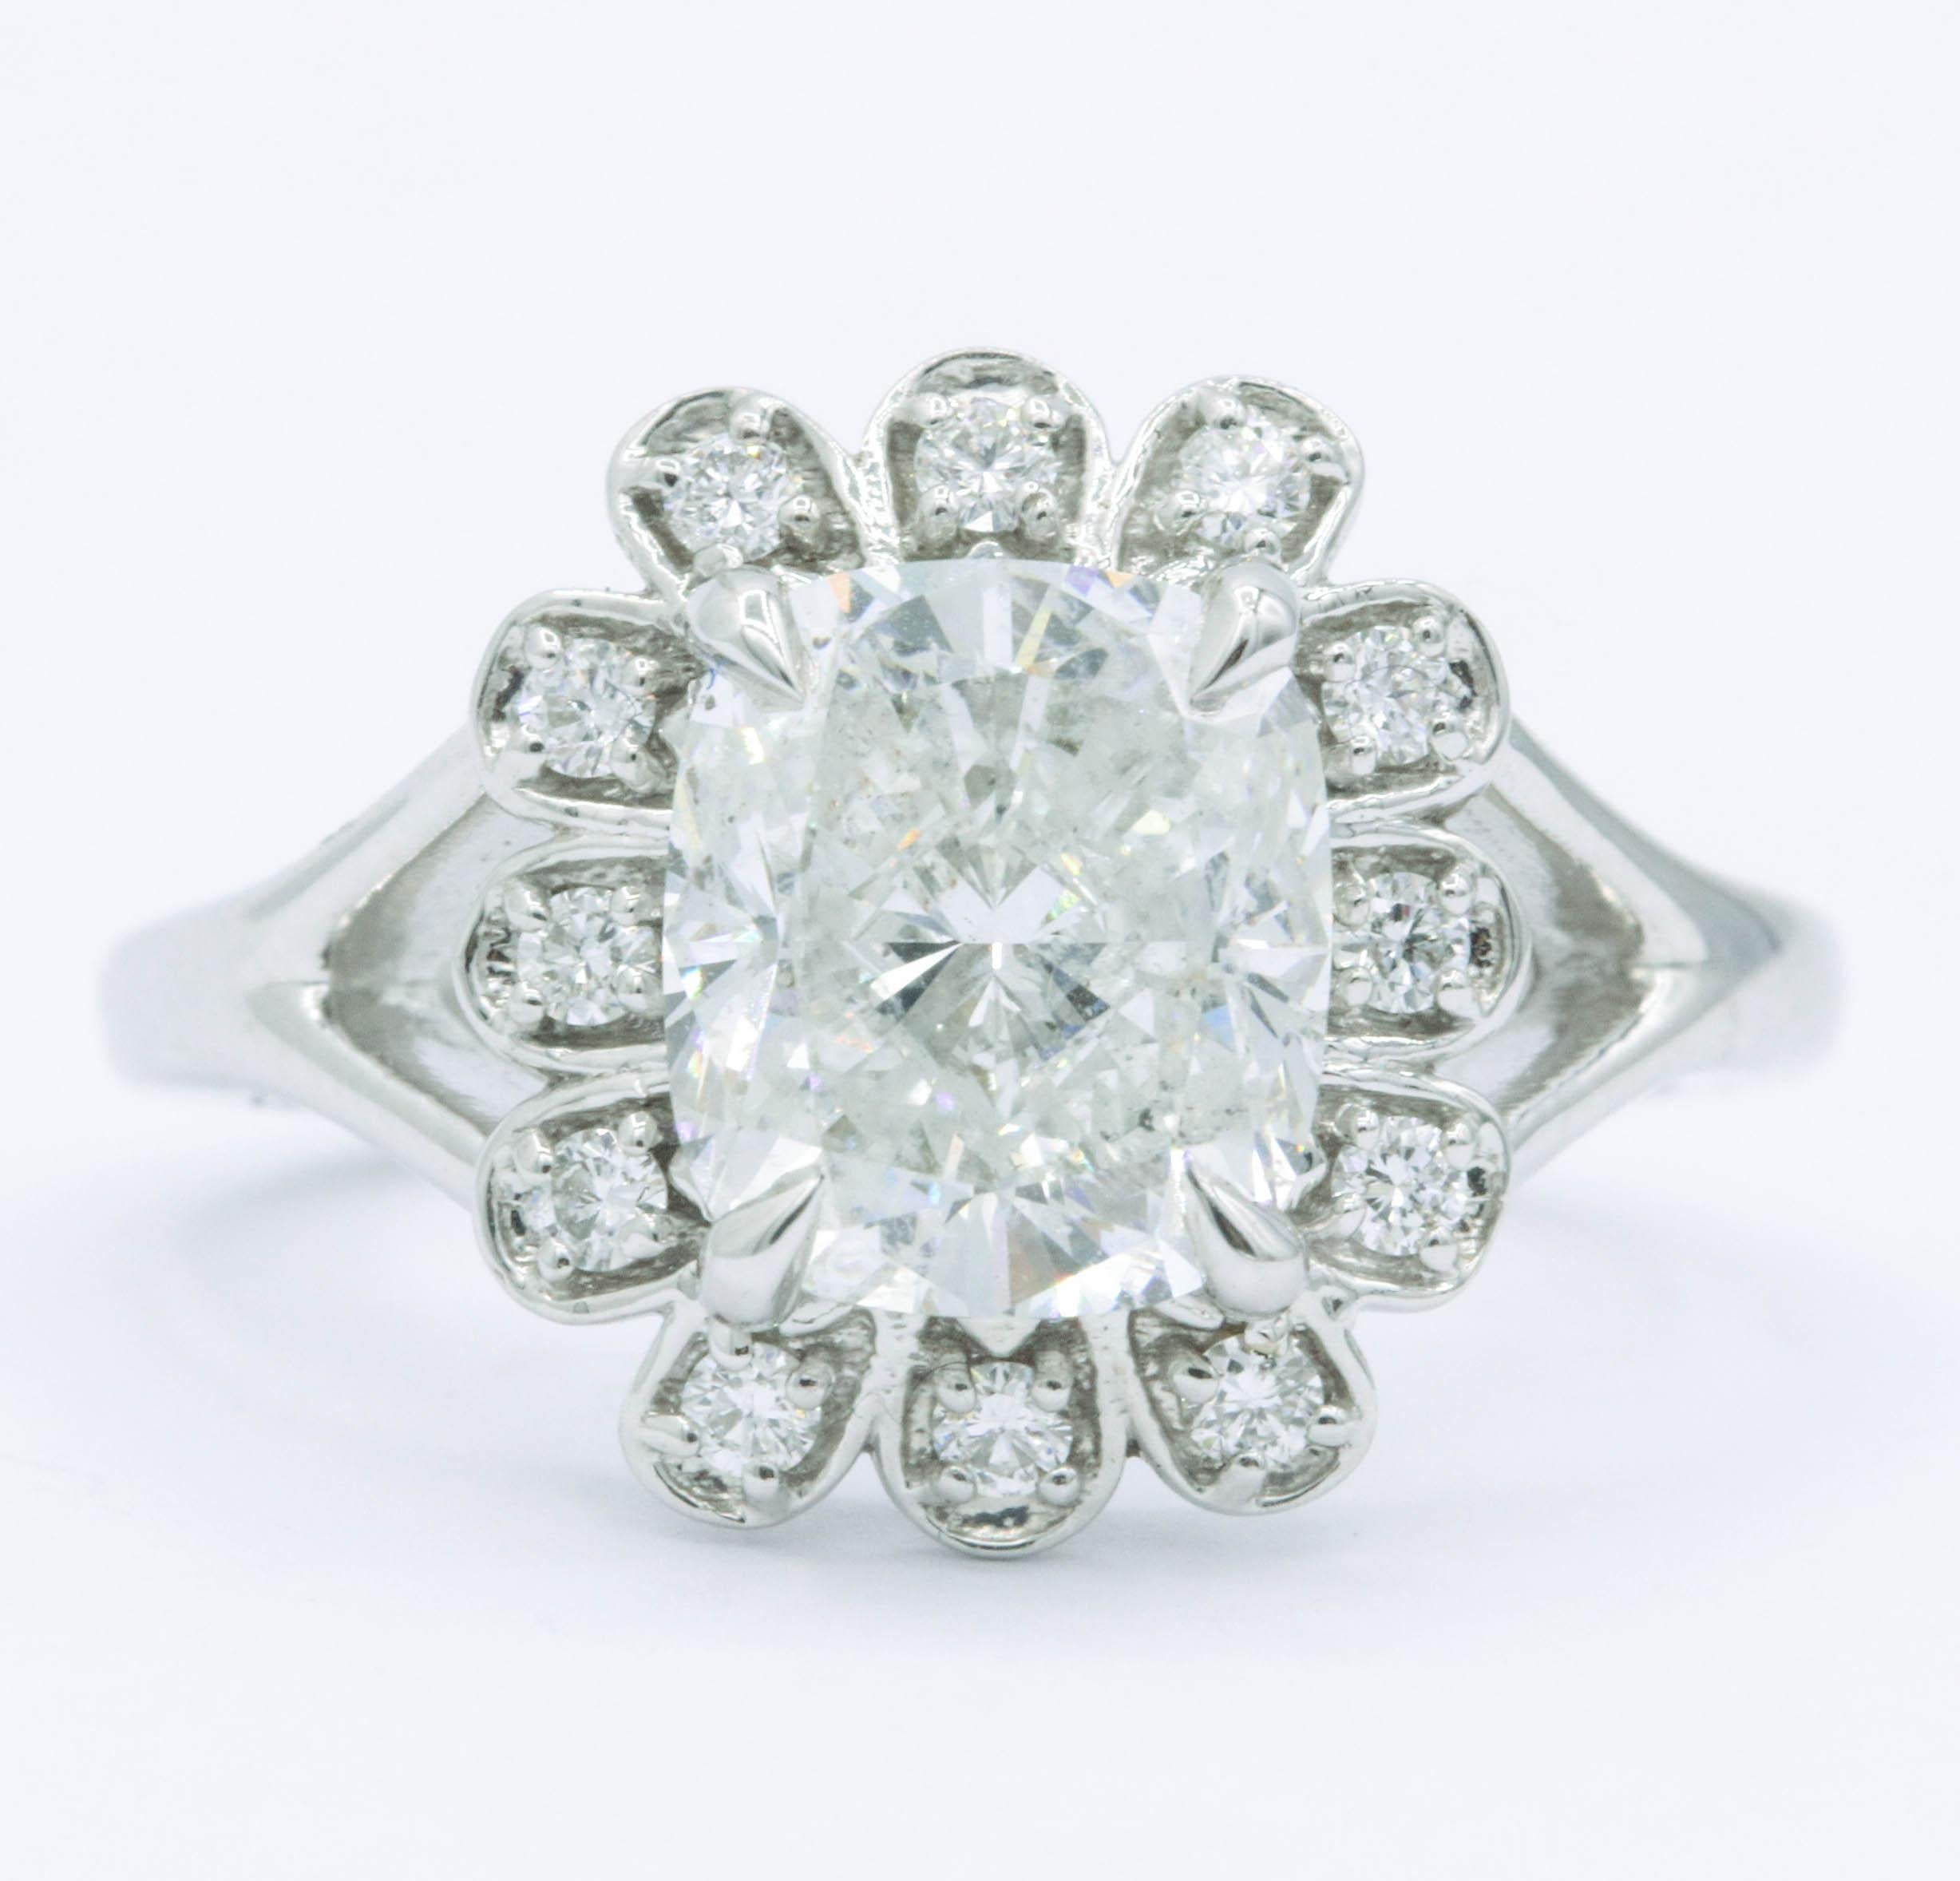 Cushion Diamond 3.03 Cts. 8 x 7.5 mm
Color G-H
Clarity SI3
12 Diamonds 0.19 cts. G-H SI 
14K White Gold